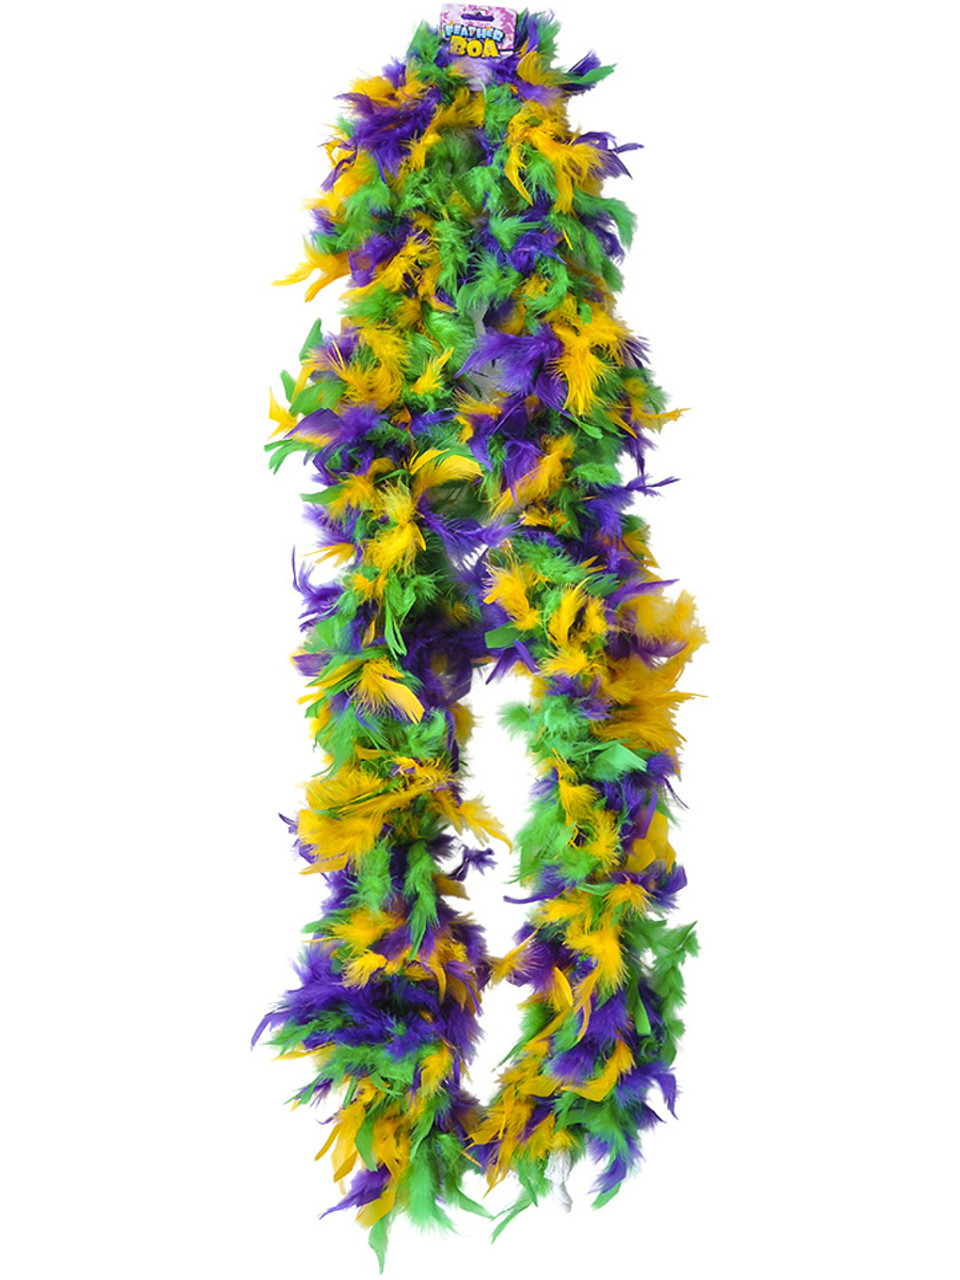 Beads by The Dozen Feather Boa Purple & Gold Mix